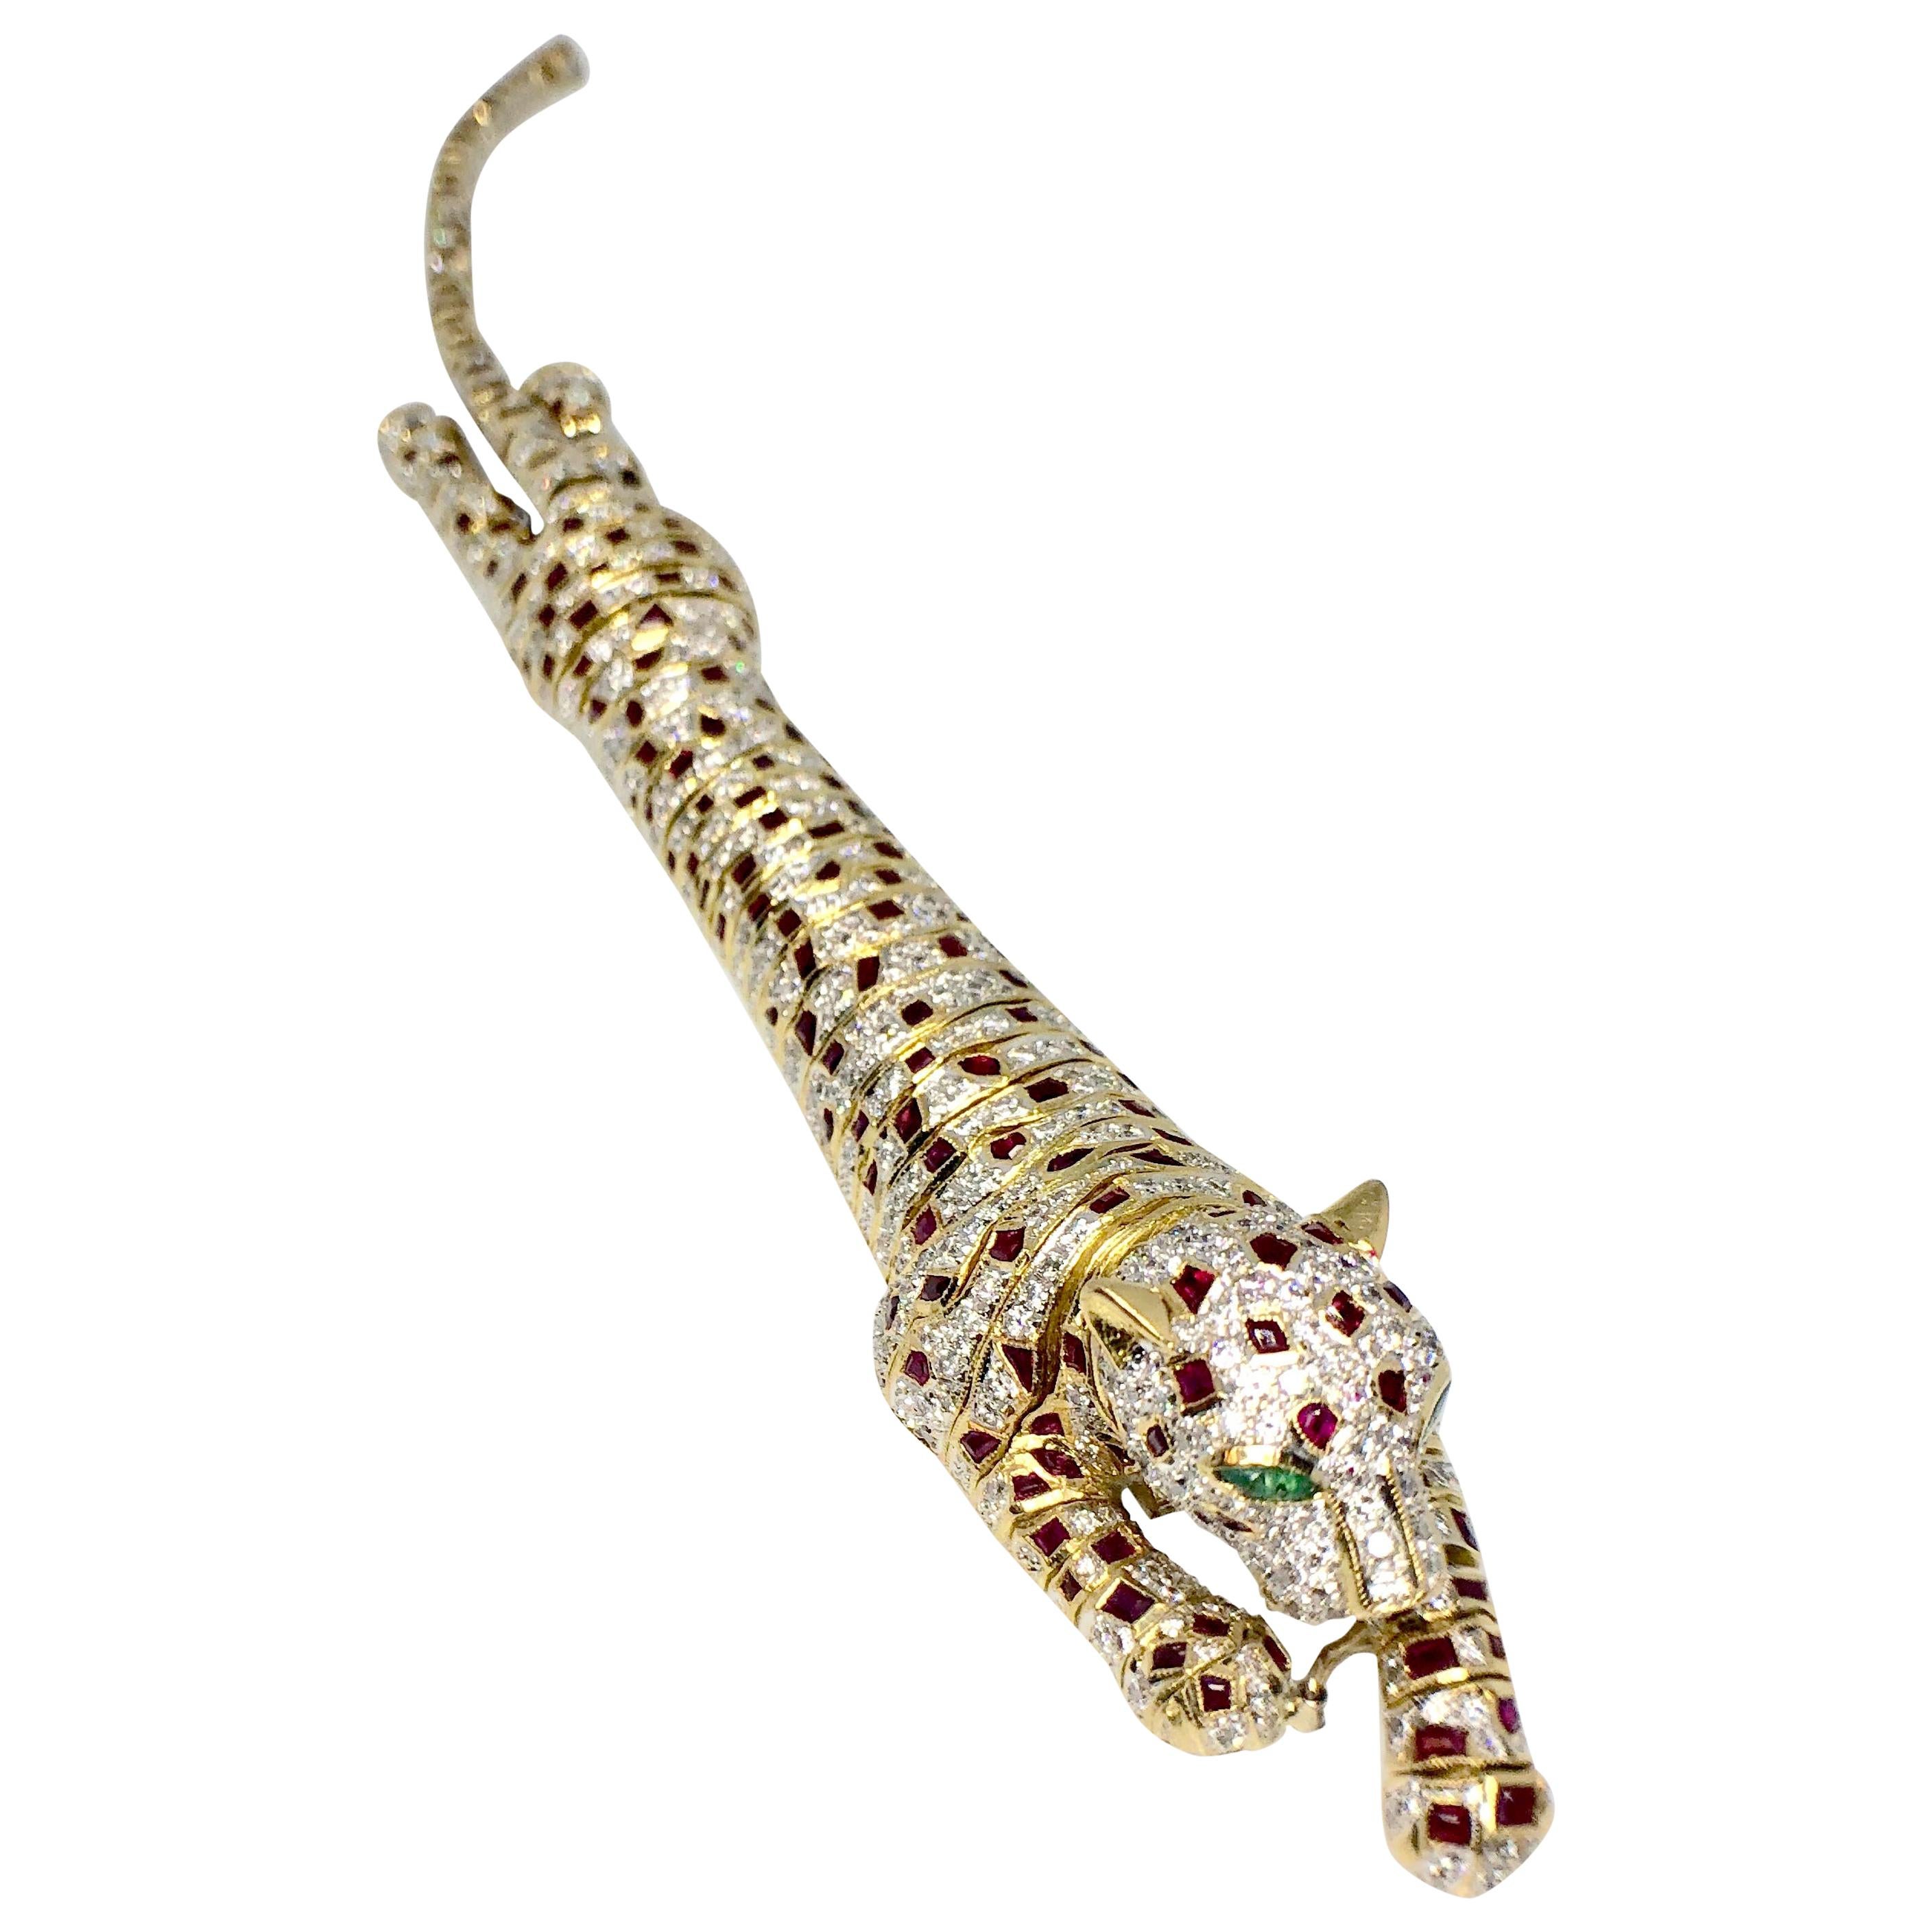 Lady's 18 Karat Yellow Gold Diamond, Ruby and Emerald Panther Bracelet or Brooch